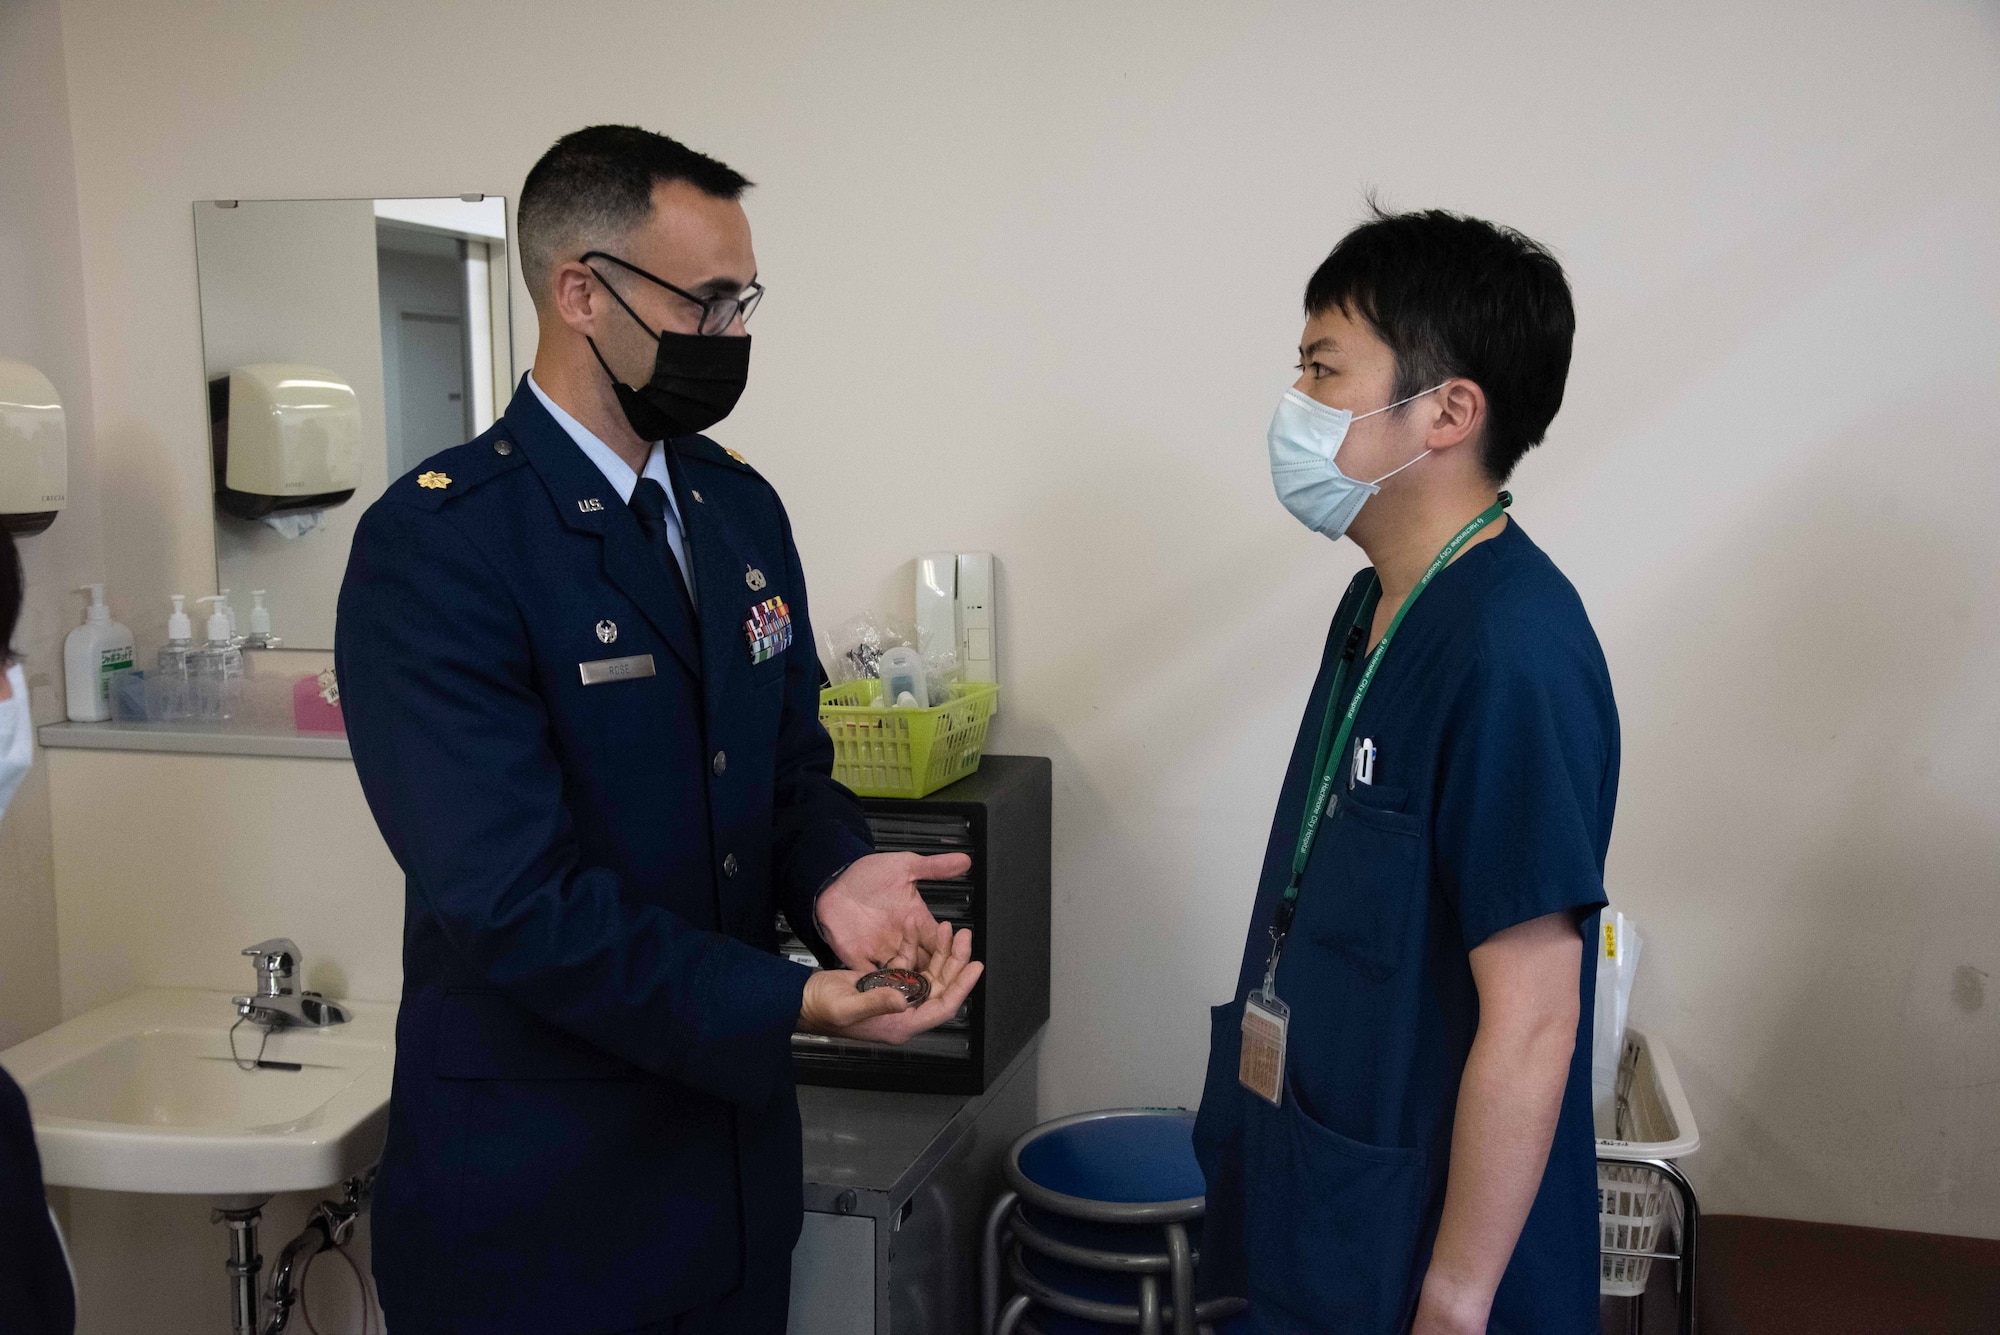 A military member explains the coin to a doctor